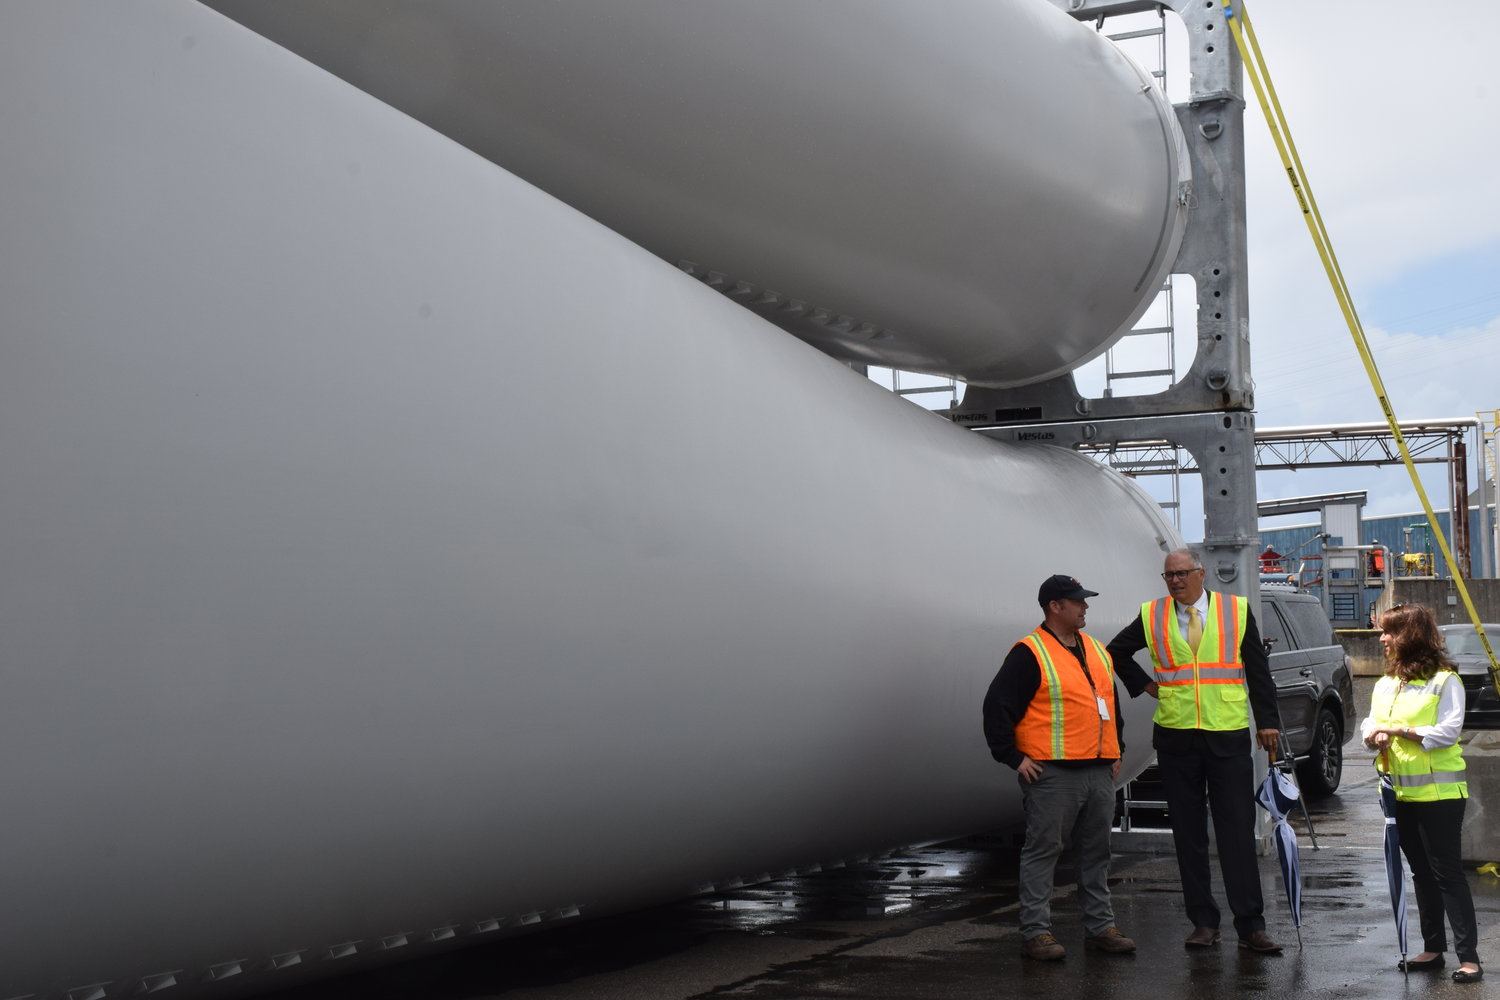 Gov. Jay Inslee, center, stands alongside ILWU Local 4 President Cager Clabaugh and Port of Vancouver CEO Julianna Marler, next to wind turbine blades stored at one of the port’s terminals on June 15.